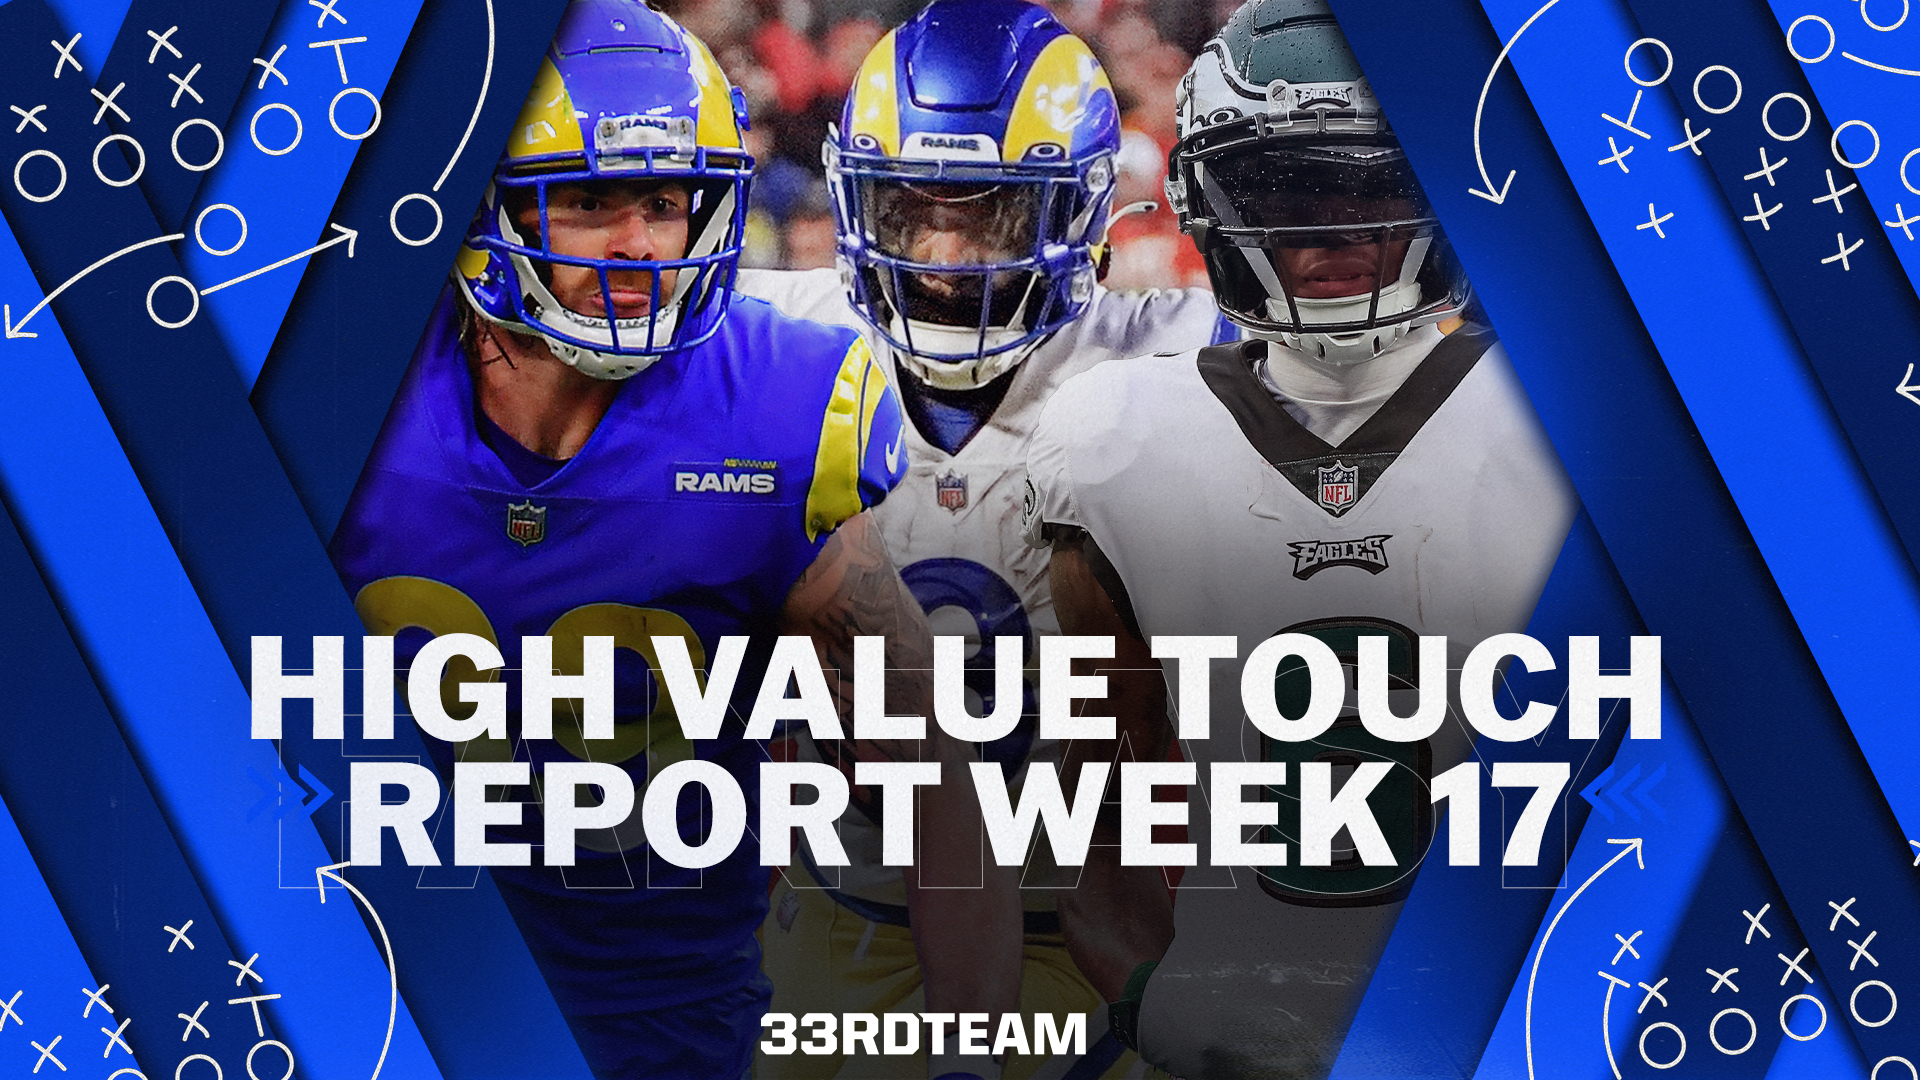 High-Value Touch Report: NFL Week 17 Fantasy Football Rushing, Receiving Data